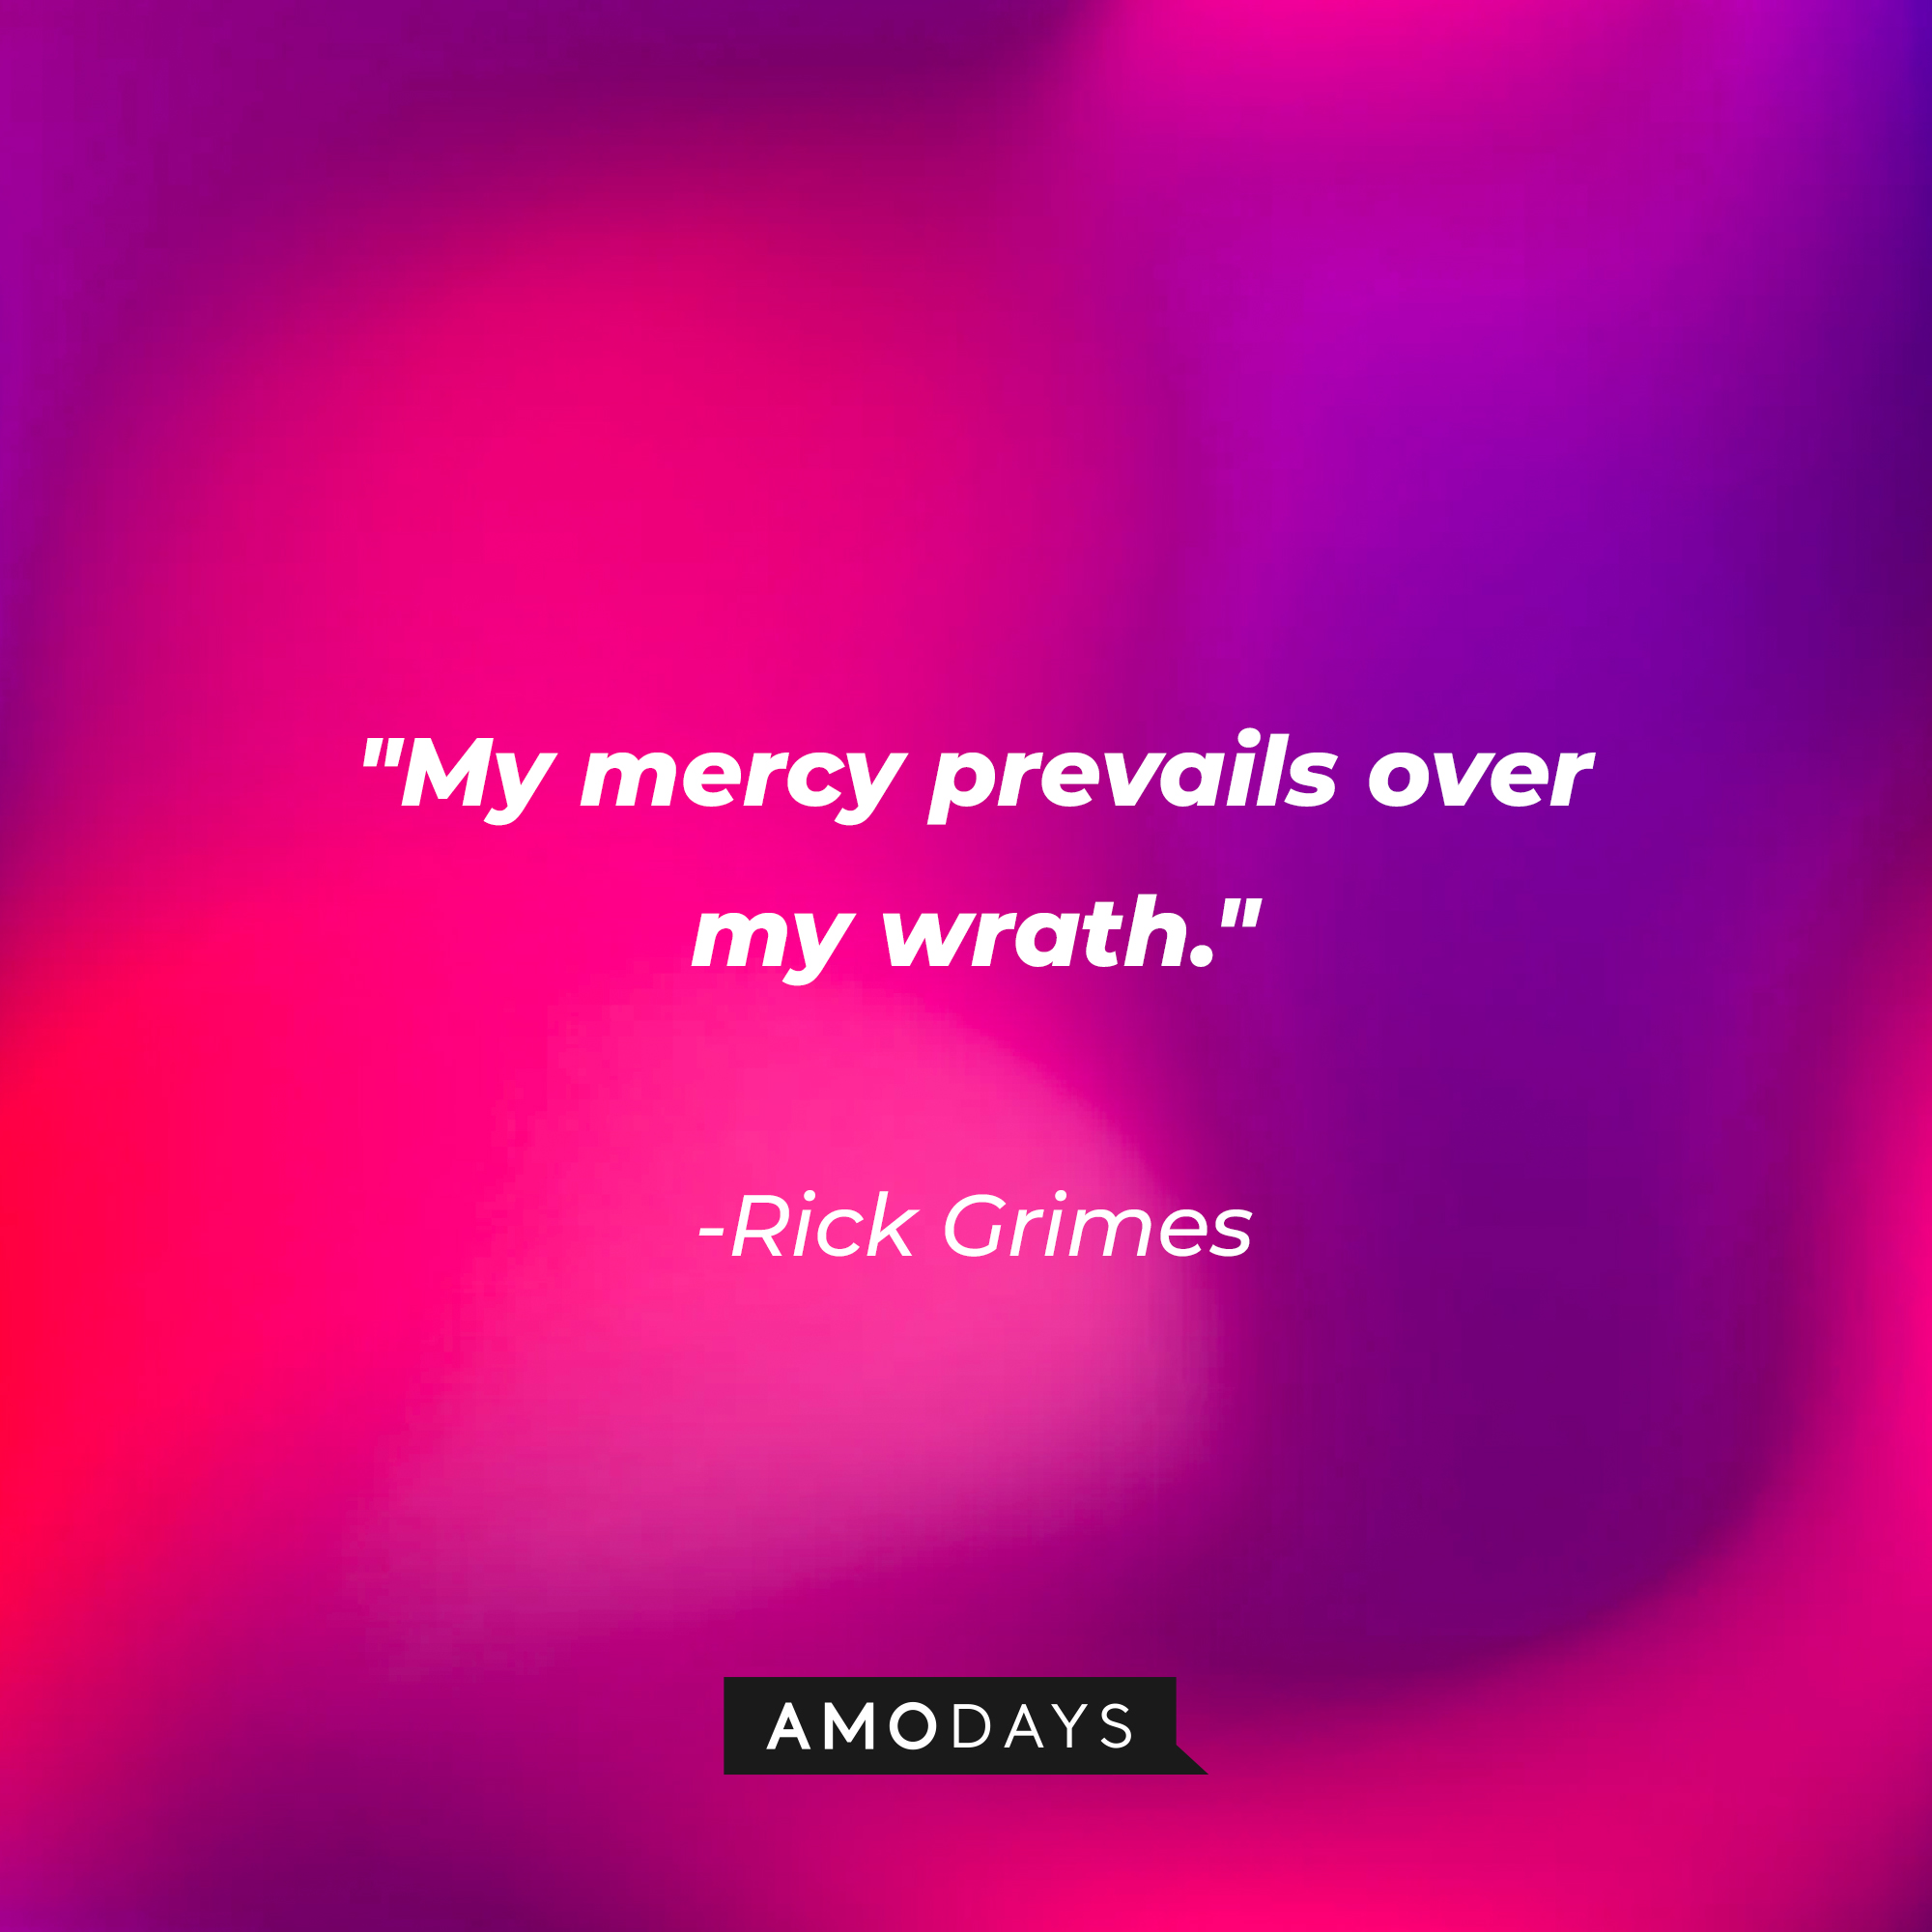 Rick Grimes' quote: "My mercy prevails over my wrath." | Source: AmoDays